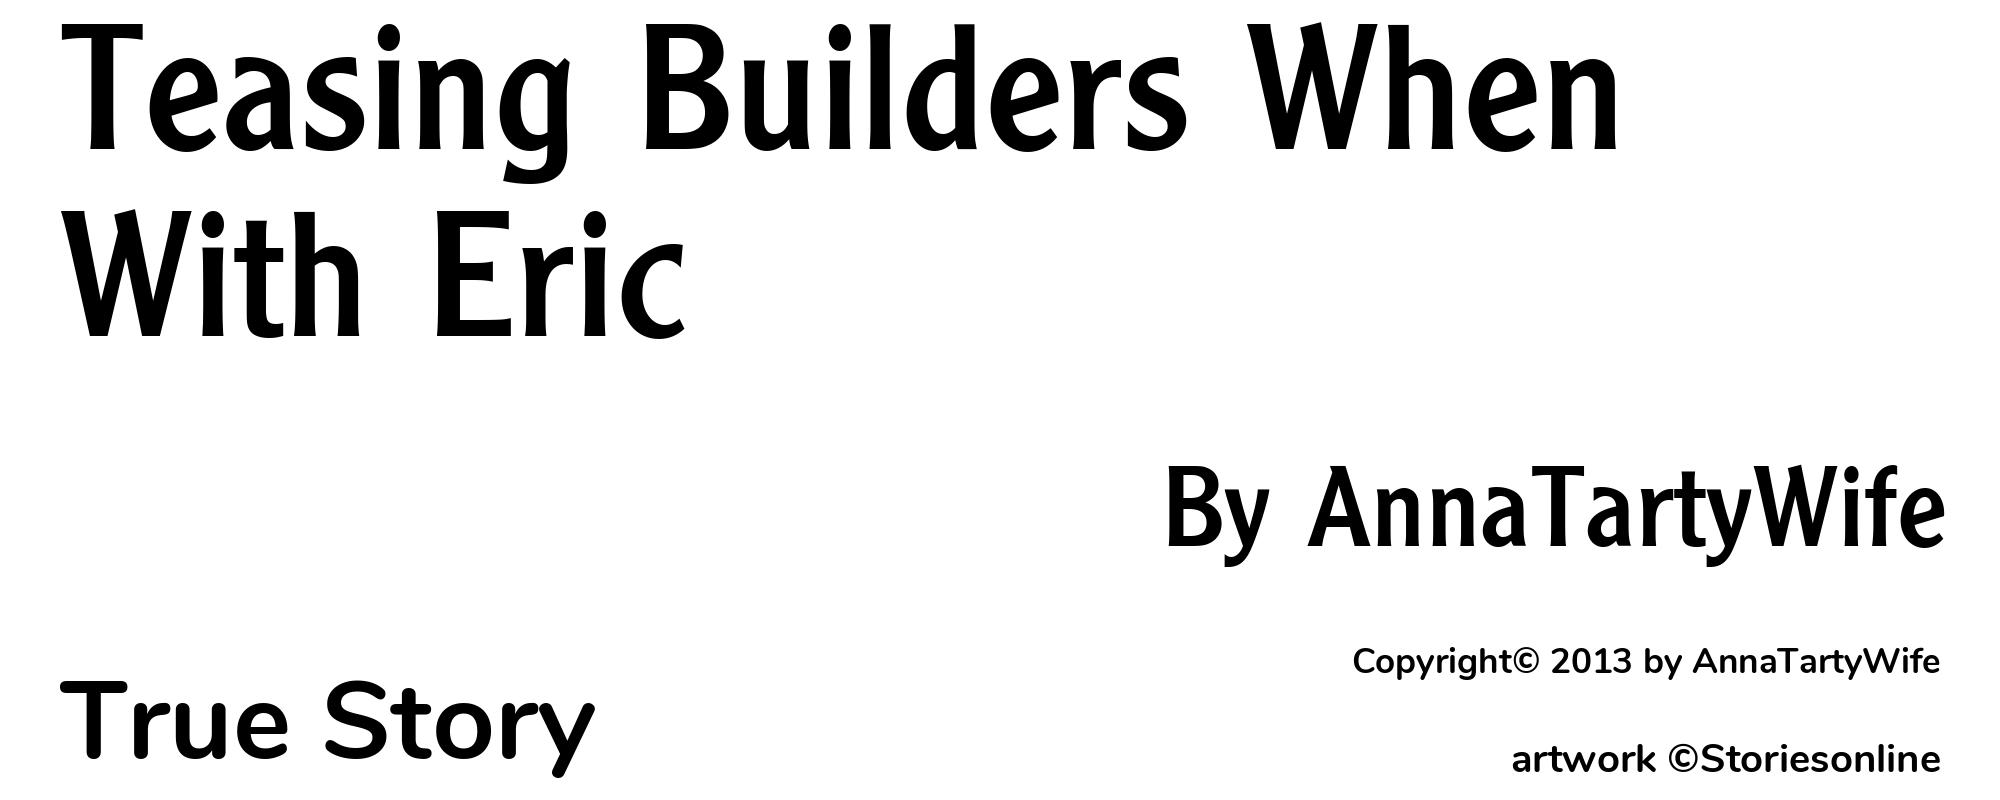 Teasing Builders When With Eric - Cover